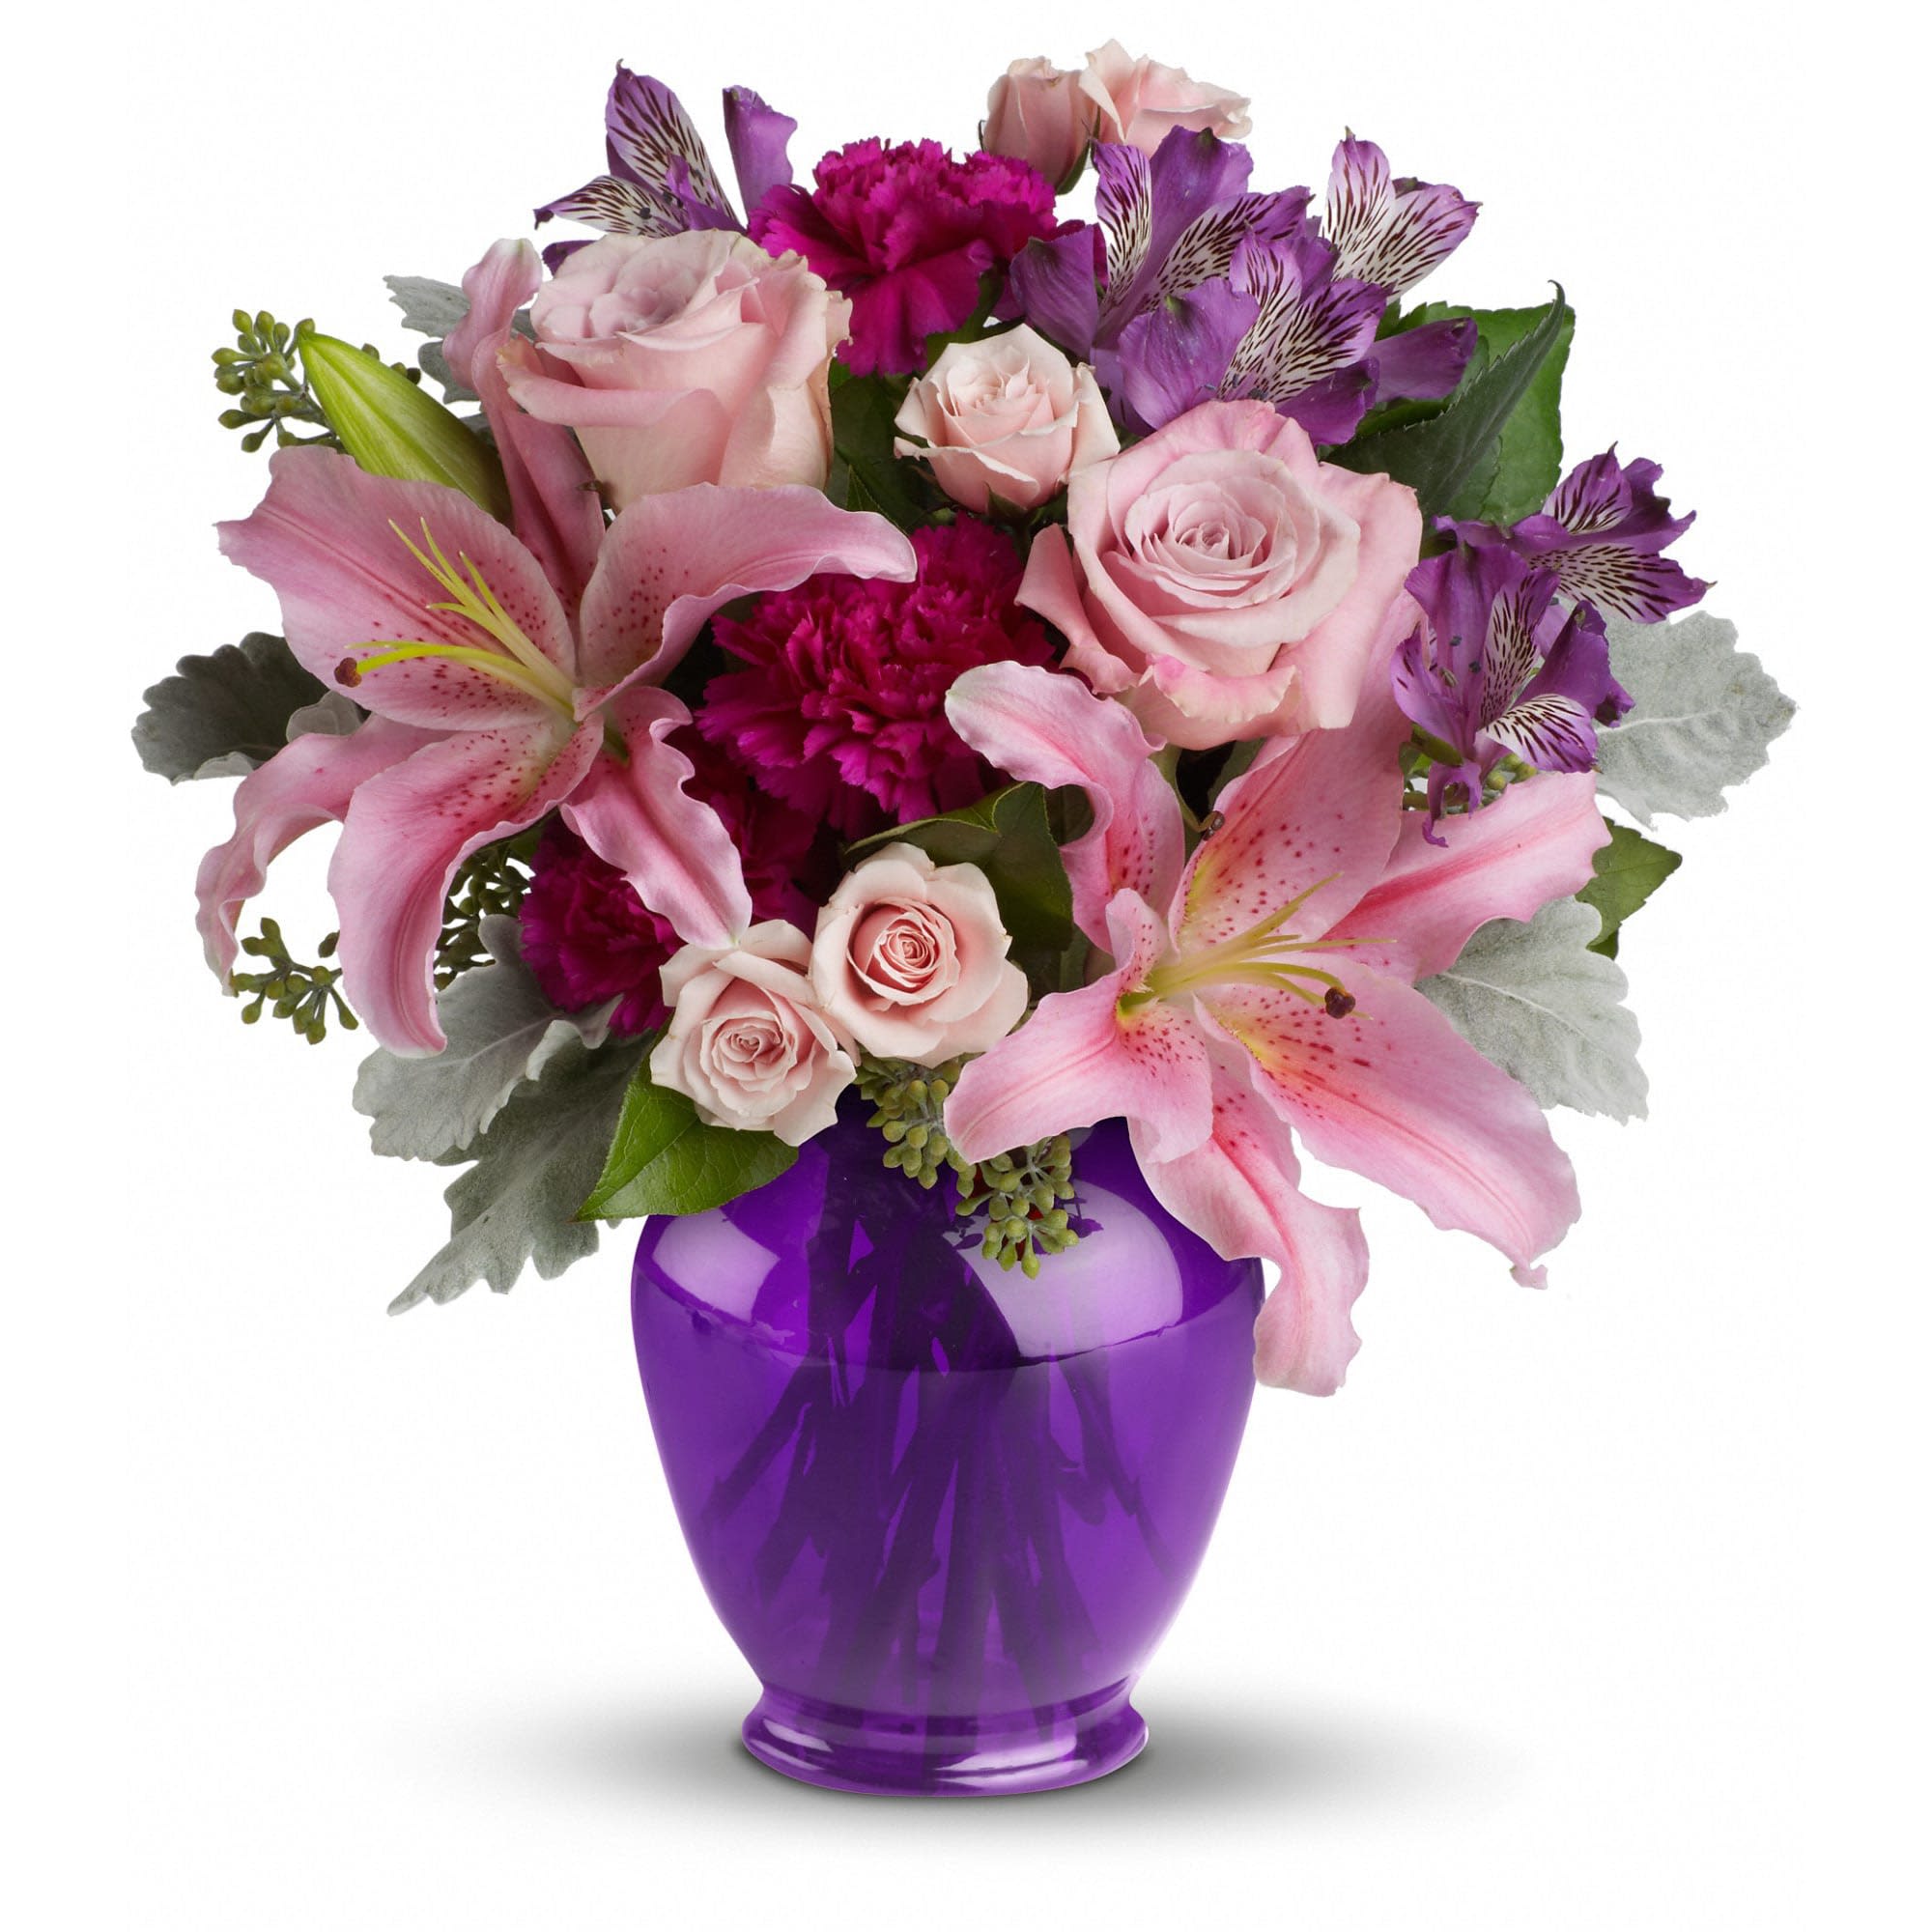 Teleflora's Elegant Beauty - Take their breath away with a spectacular array of pink roses and lilies in a classic ginger jar in deep royal purple. Truly a stunning gift, but without a stunning price tag.  